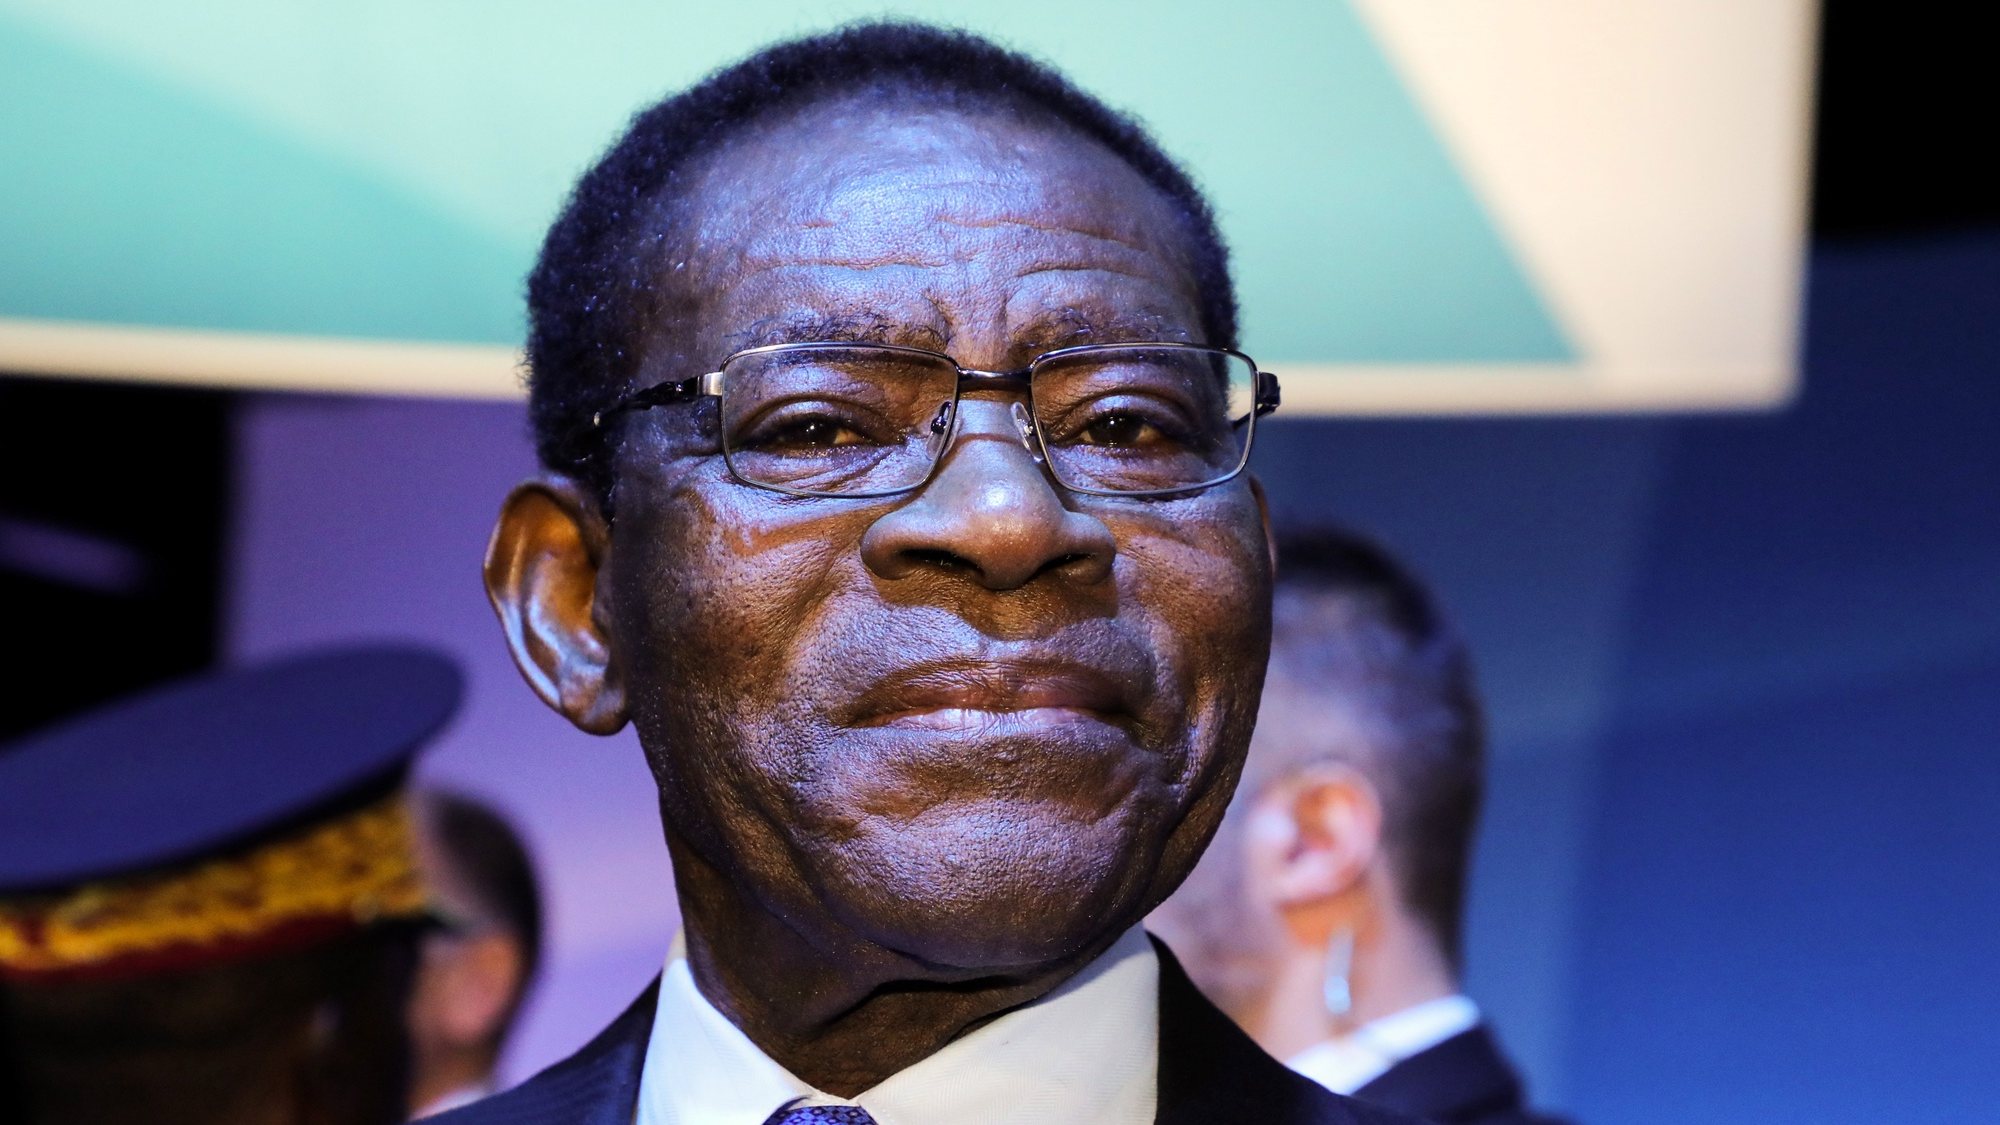 epa10332060 (FILE) Equatorial Guinea President Teodoro Obiang Nguema Mbasogo attends the plenary session of the Paris Peace Forum, in Paris, France, 12 November 2019 (reissued 27 November 2022). Obiang won a sixth term in office after he secured almost 95% of votes in general elections on 20 November, the government announced 26 November 2022.  EPA/LUDOVIC MARIN / POOL MAXPPP OUT